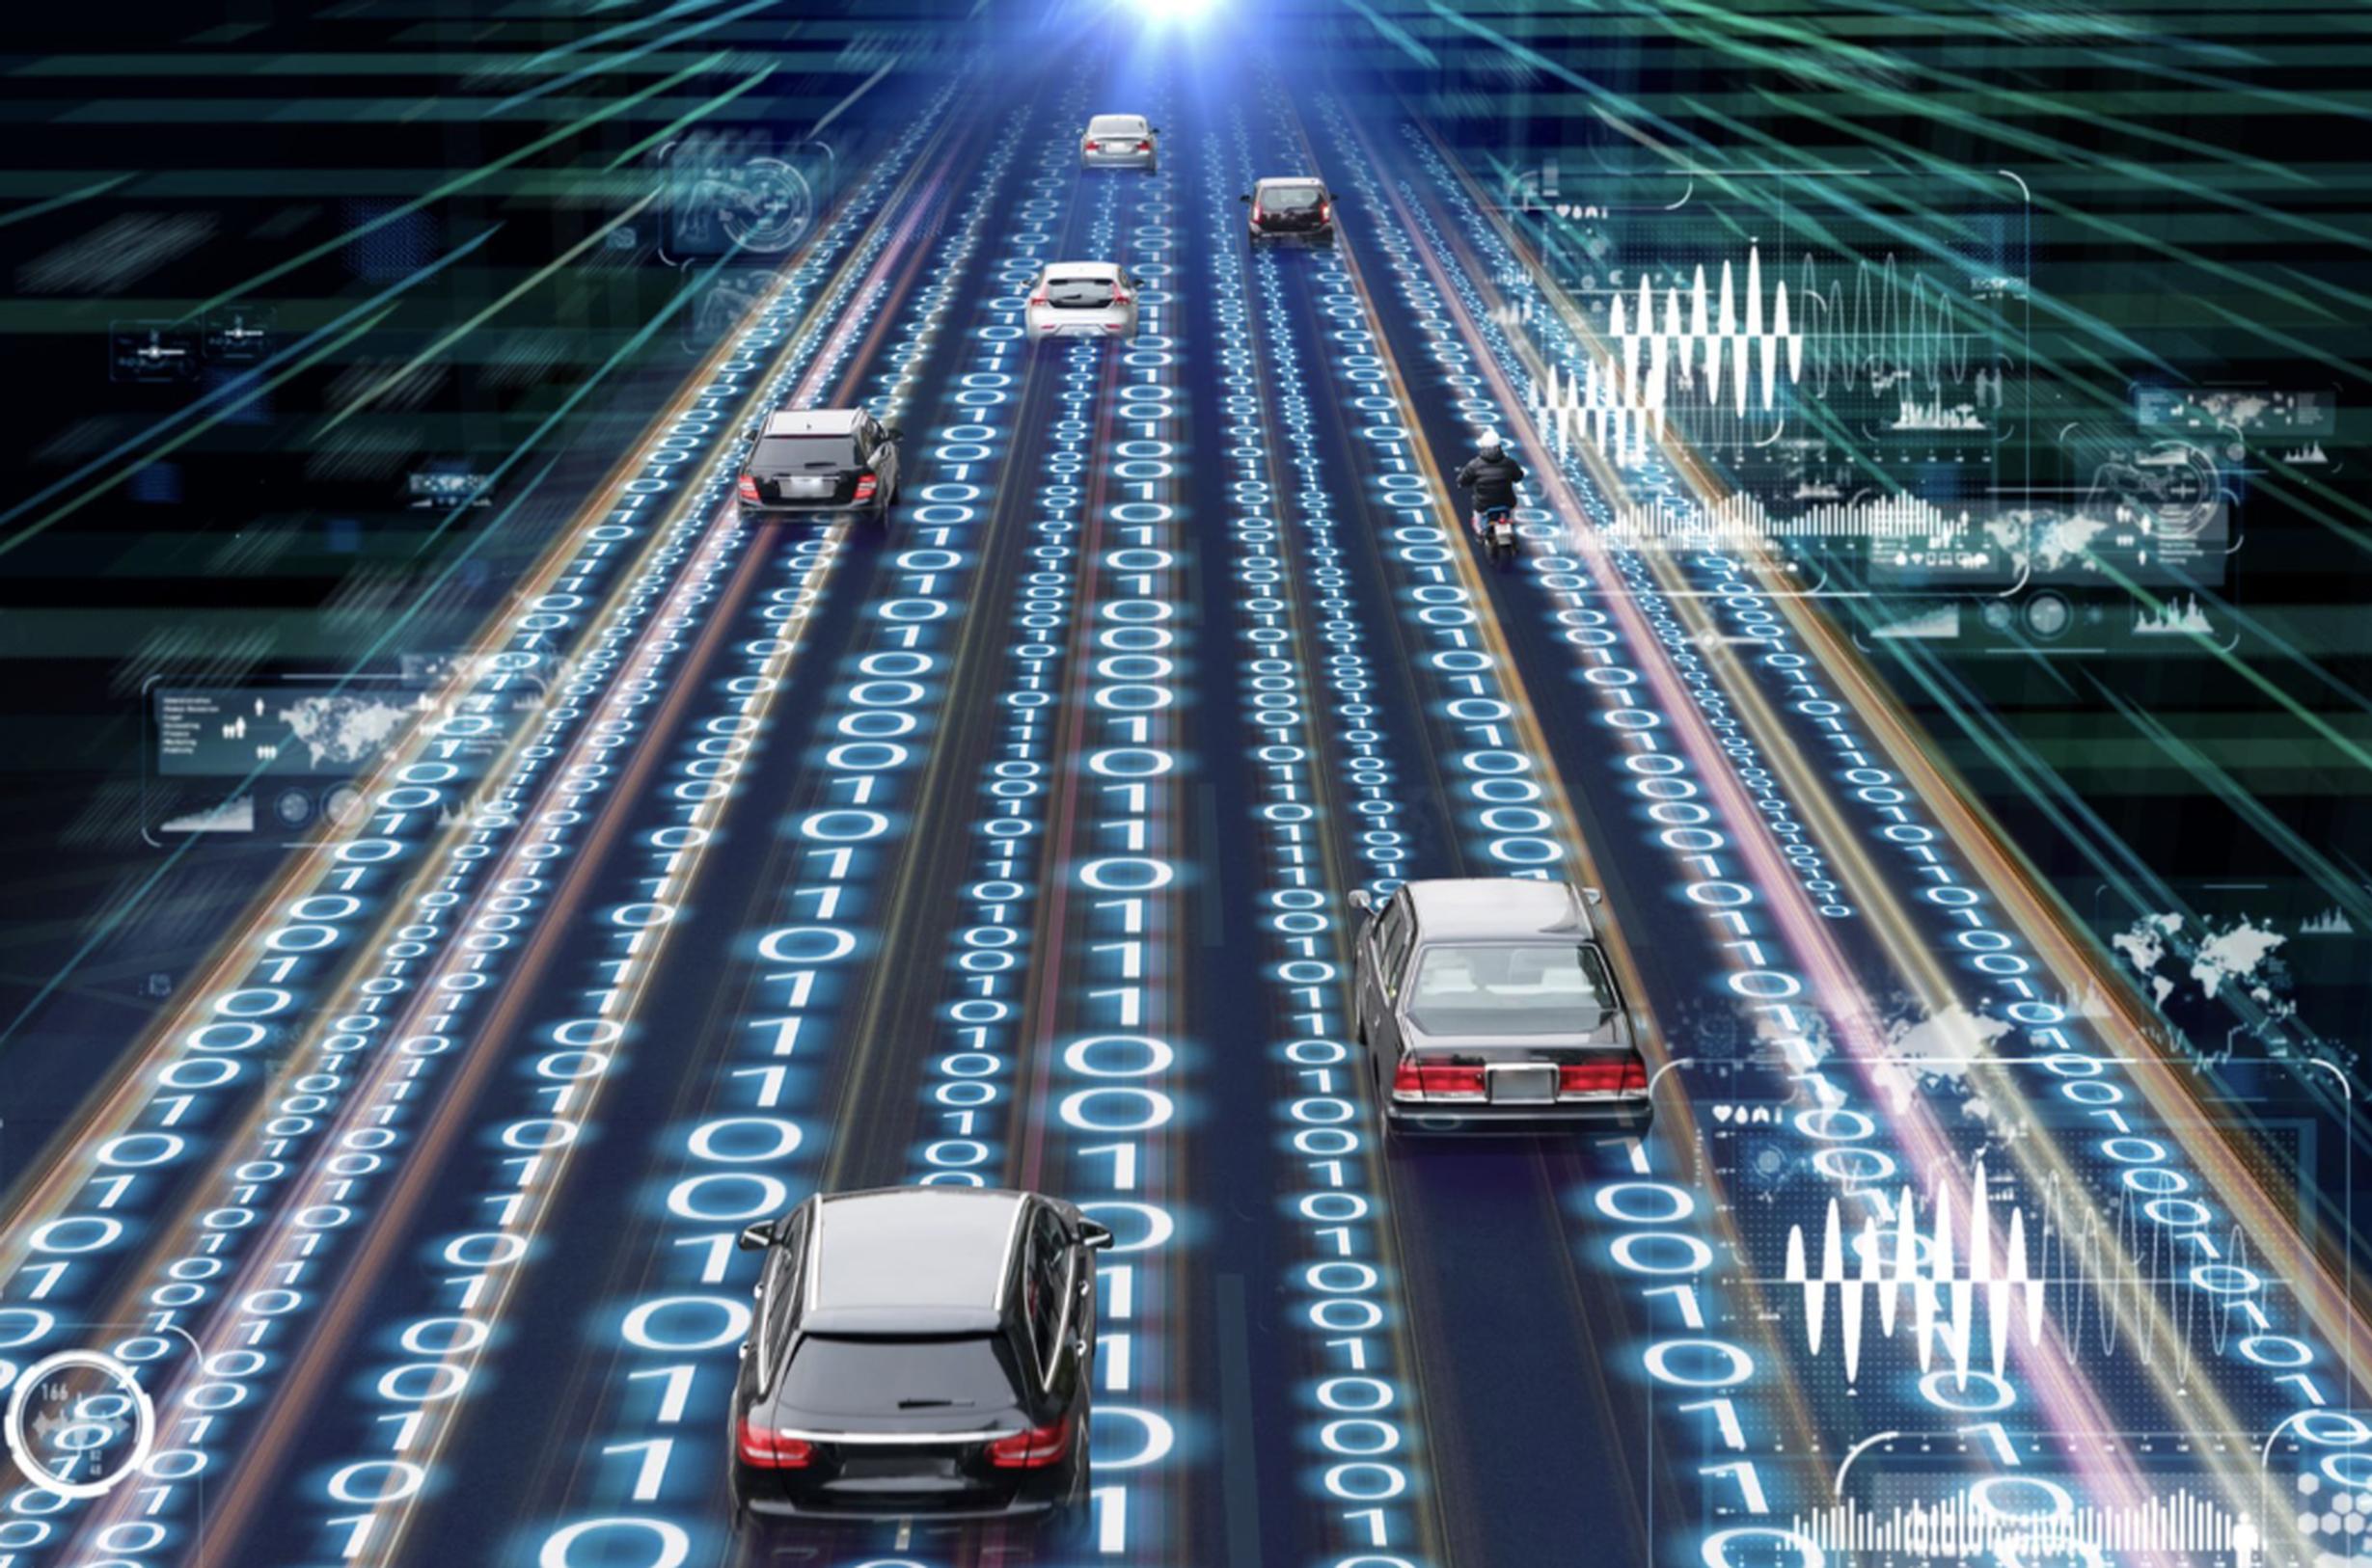 “Digital roads” is a broad concept where increasing use of information technology, data and connectivity allows step-changes to the way roads are designed, built, managed and used